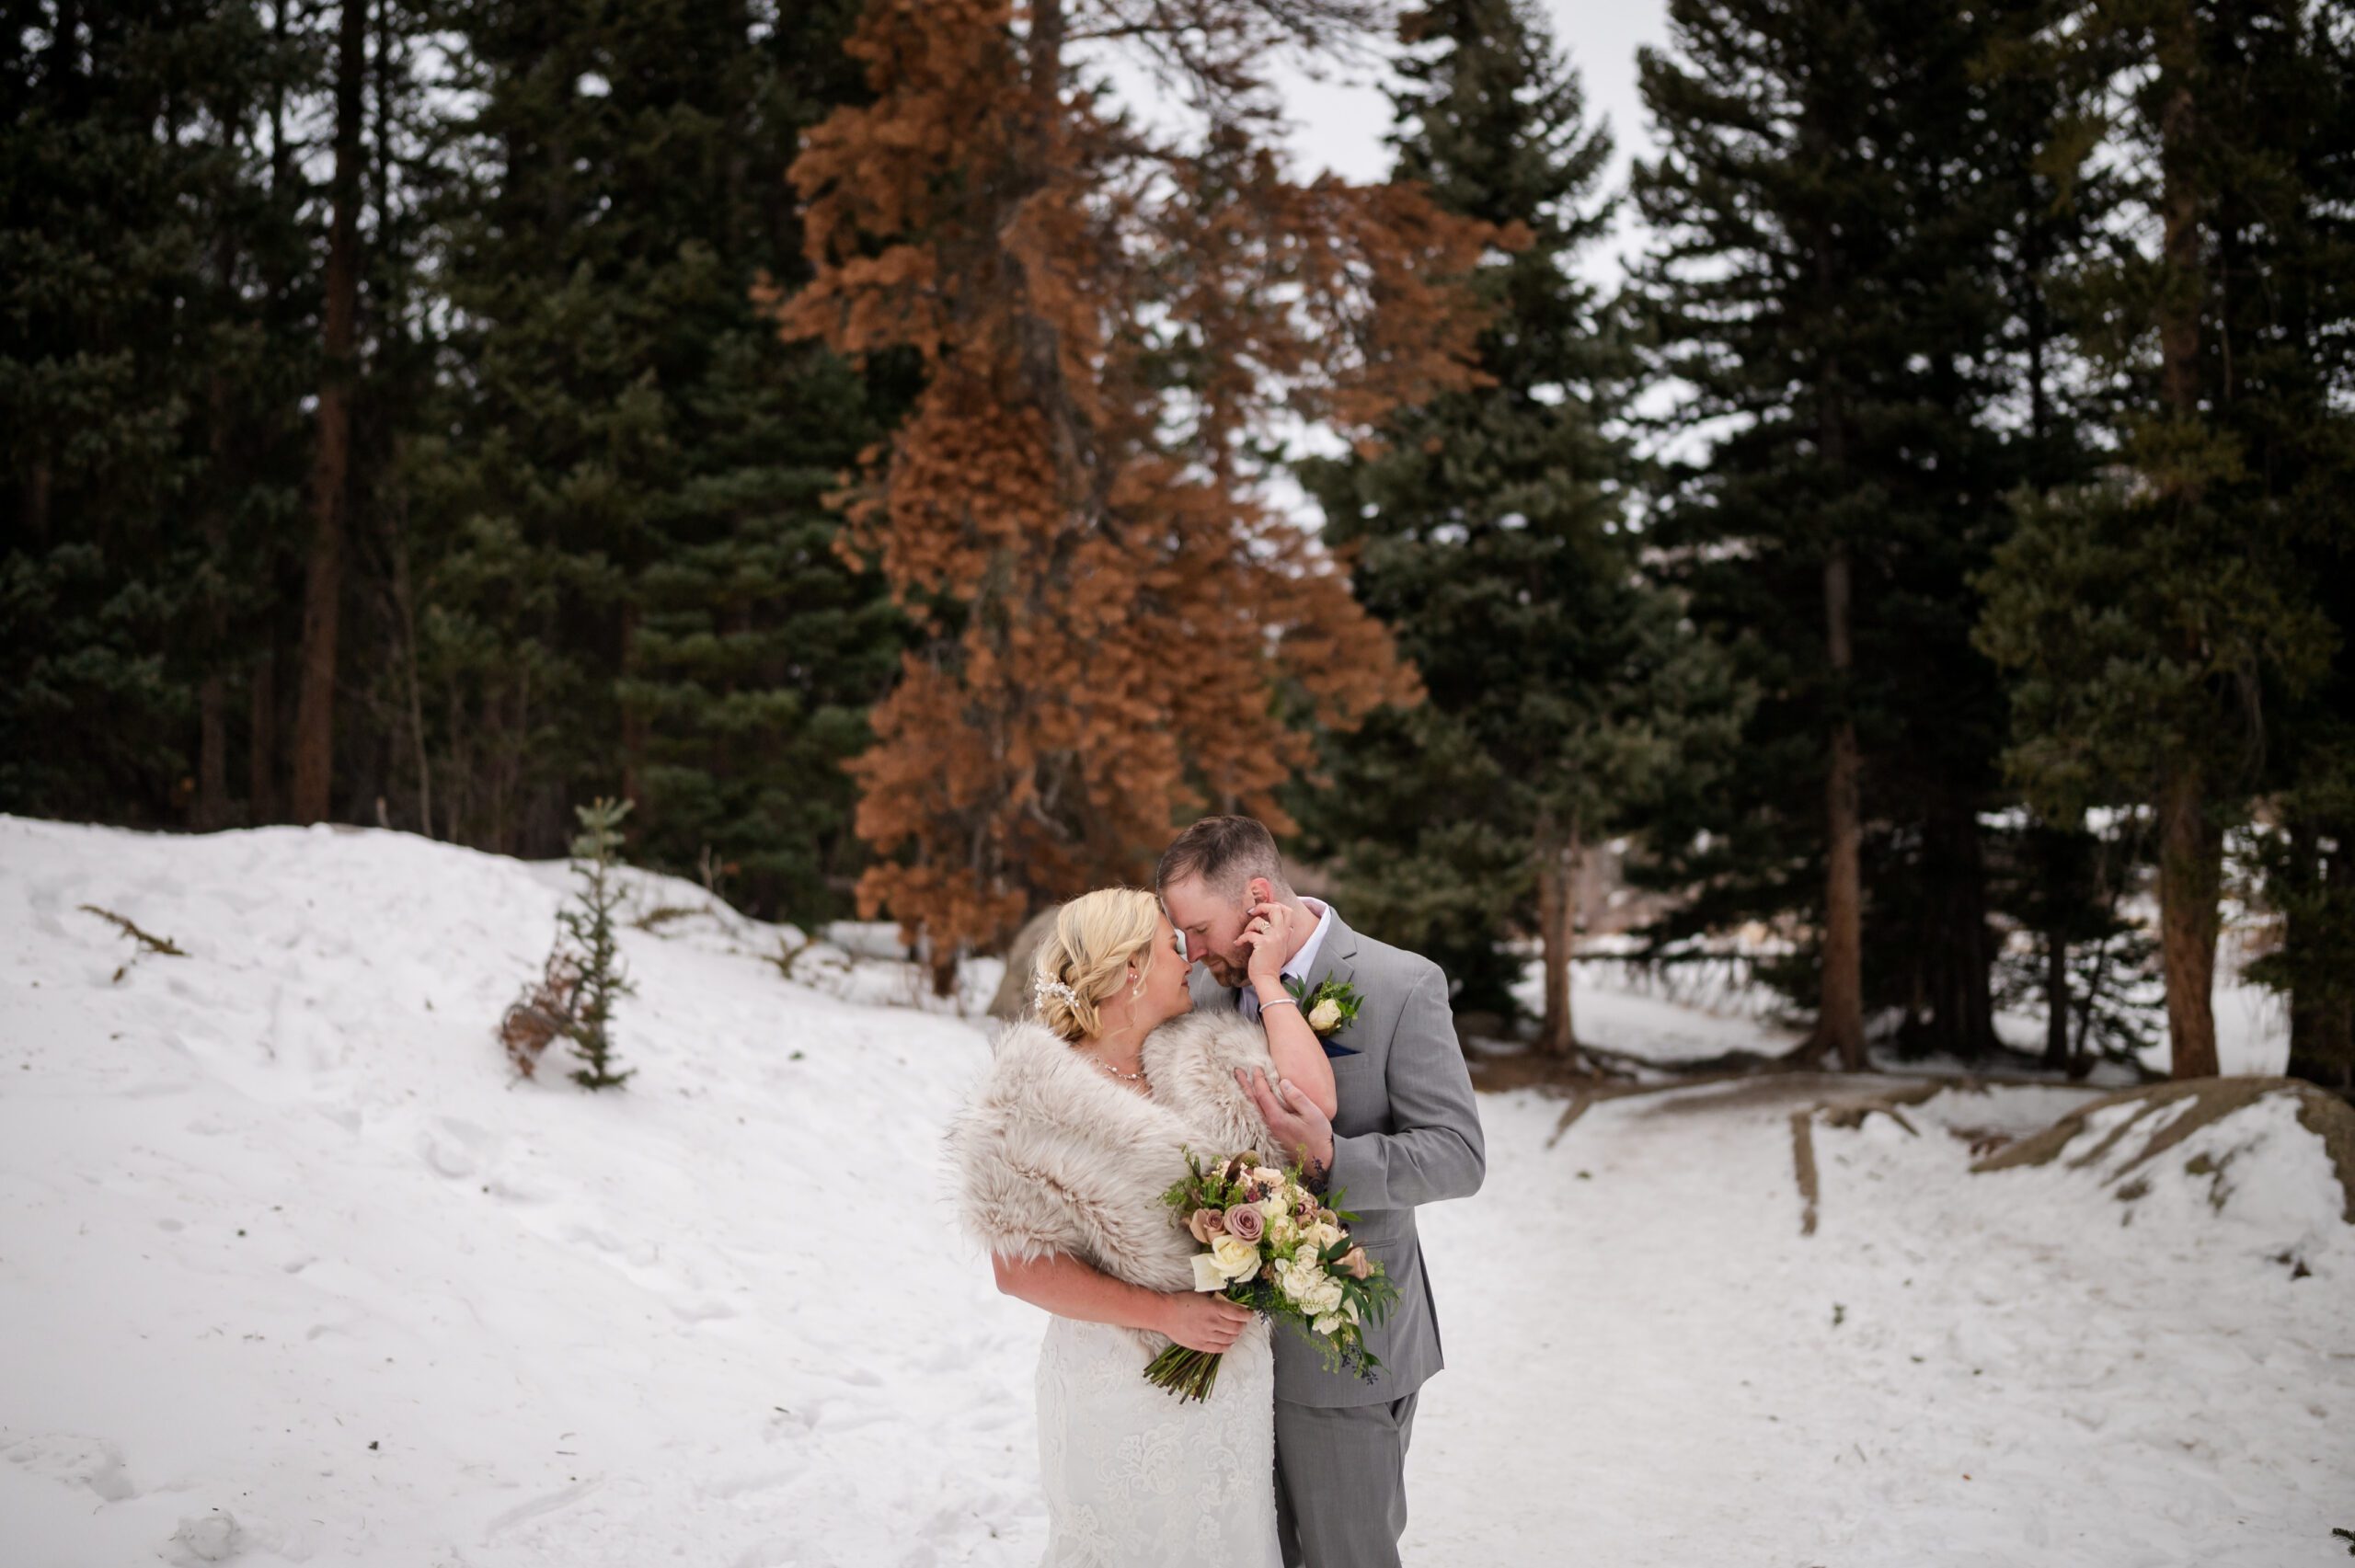 the bride and groom's holding each other closely Winter Elopement at Sprague Lake. 